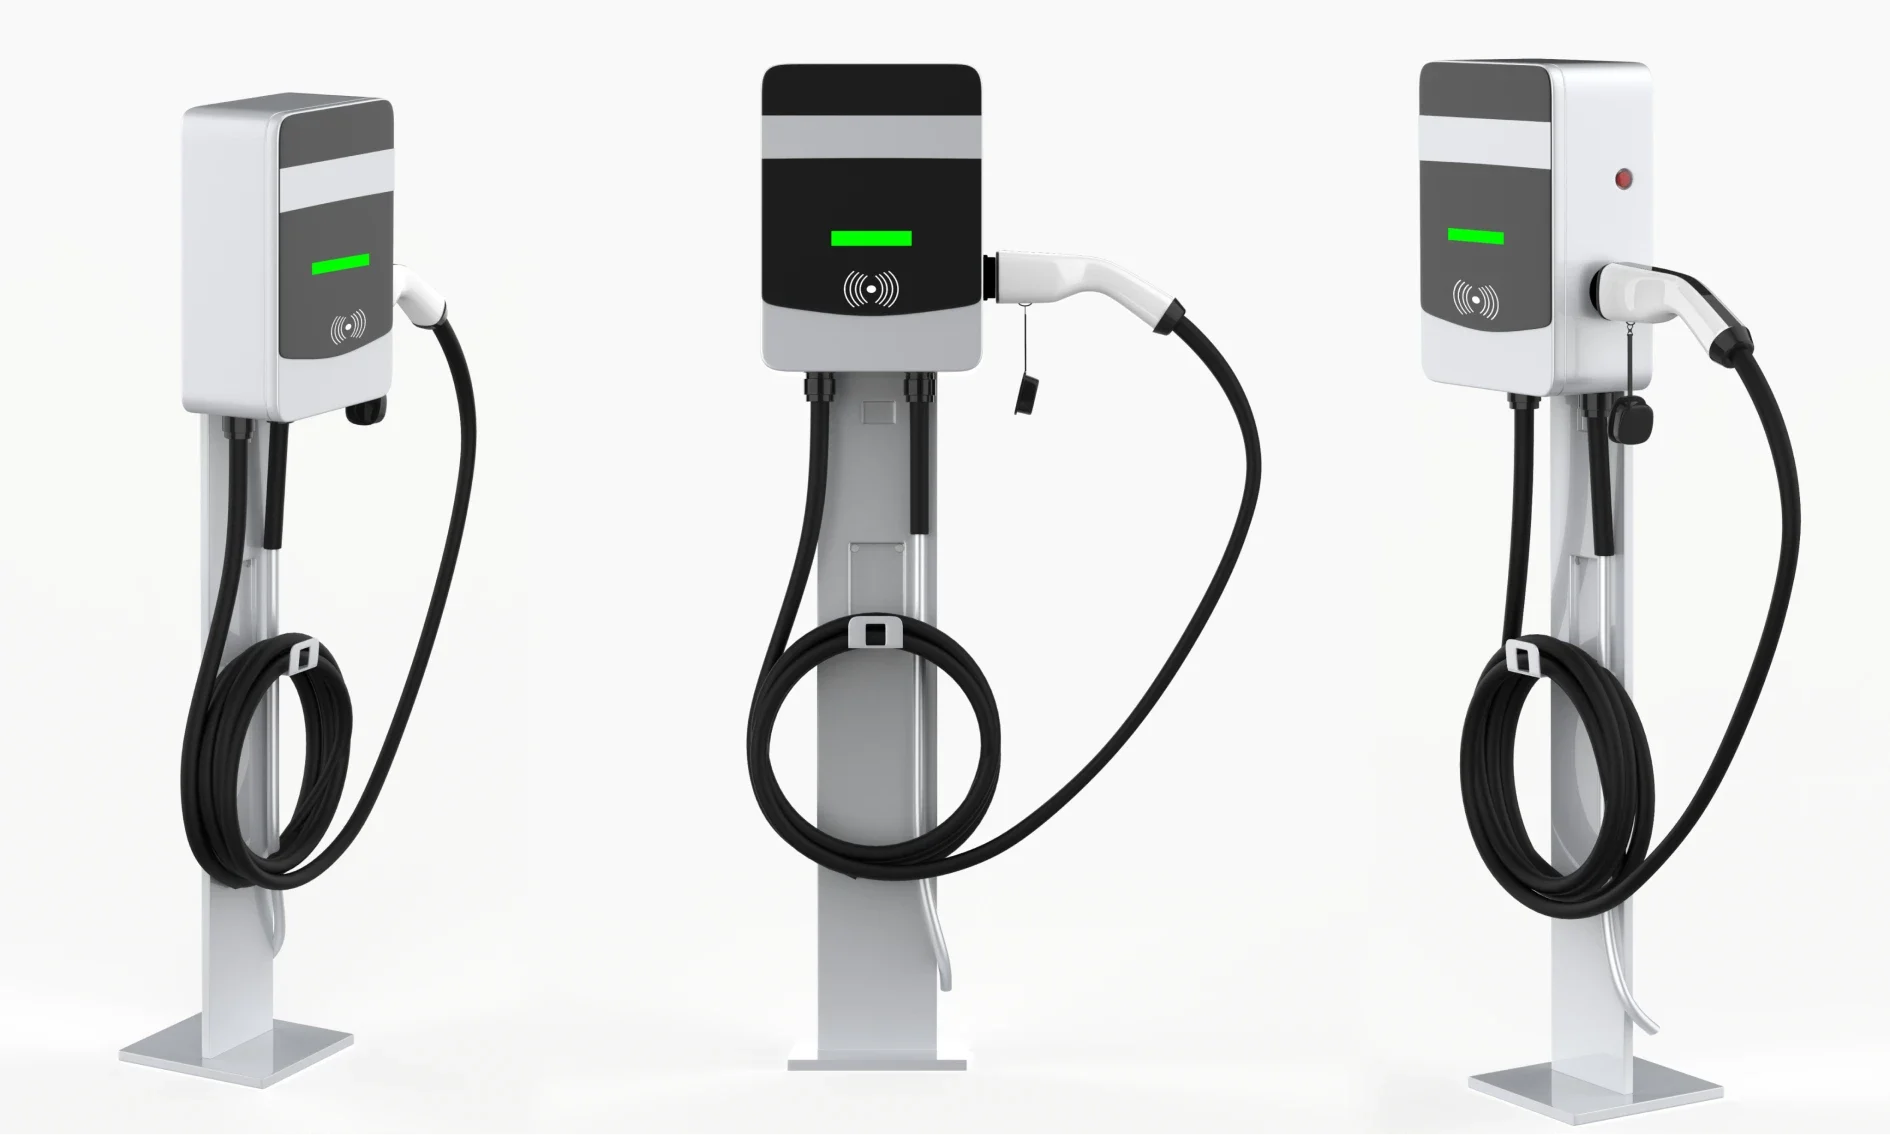 Charge Point Operators, or CPOs, are responsible for the physical infrastructure of EV charging.